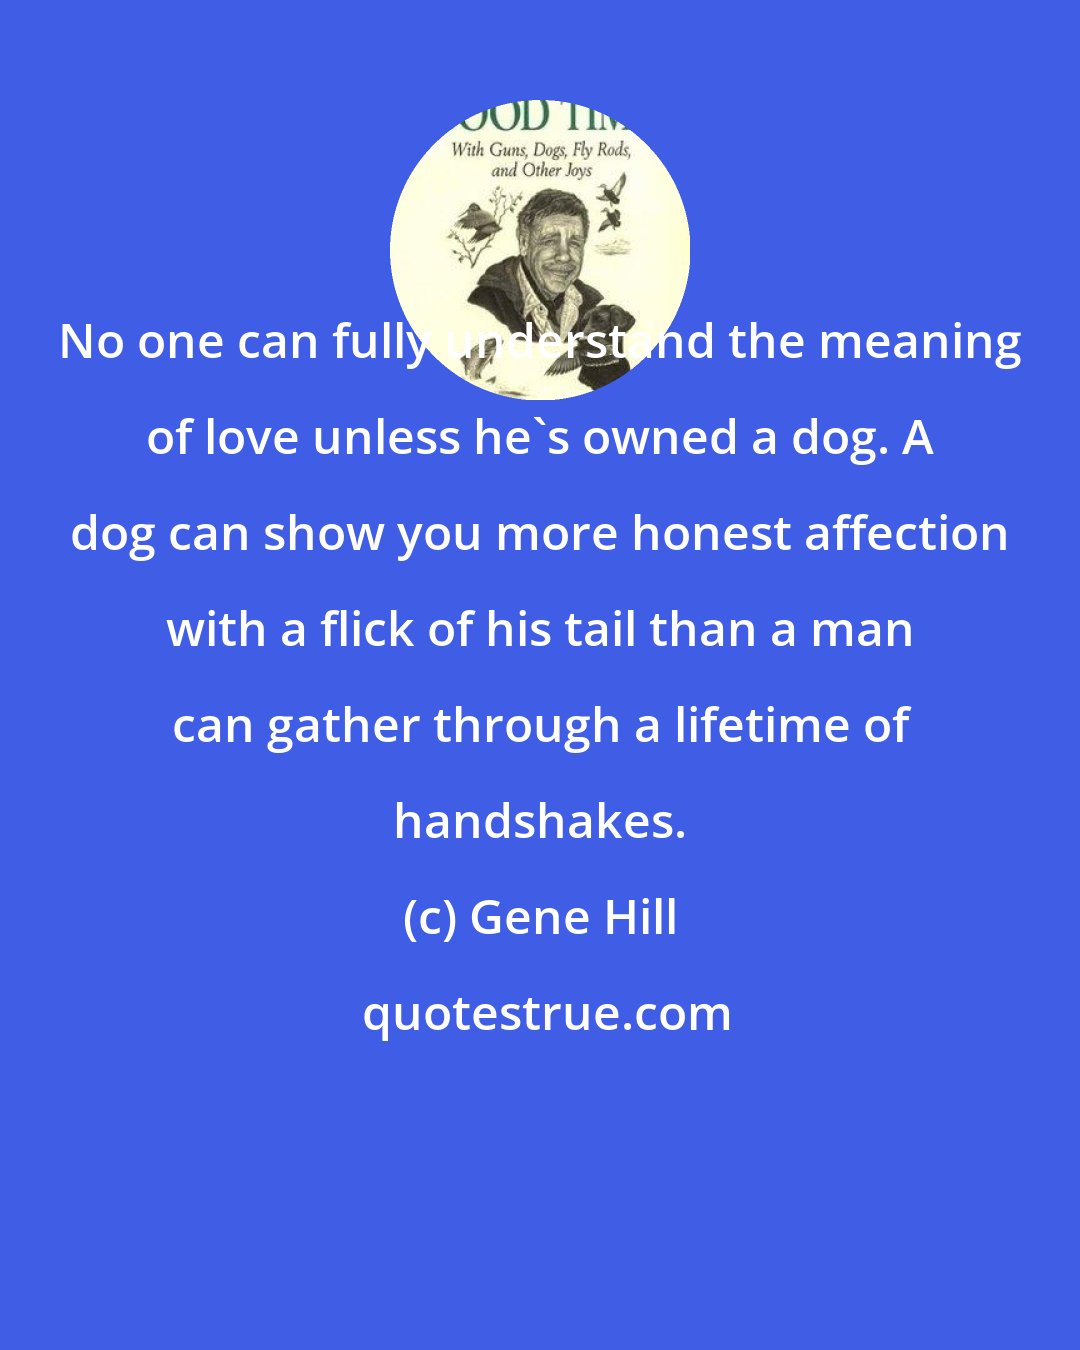 Gene Hill: No one can fully understand the meaning of love unless he's owned a dog. A dog can show you more honest affection with a flick of his tail than a man can gather through a lifetime of handshakes.